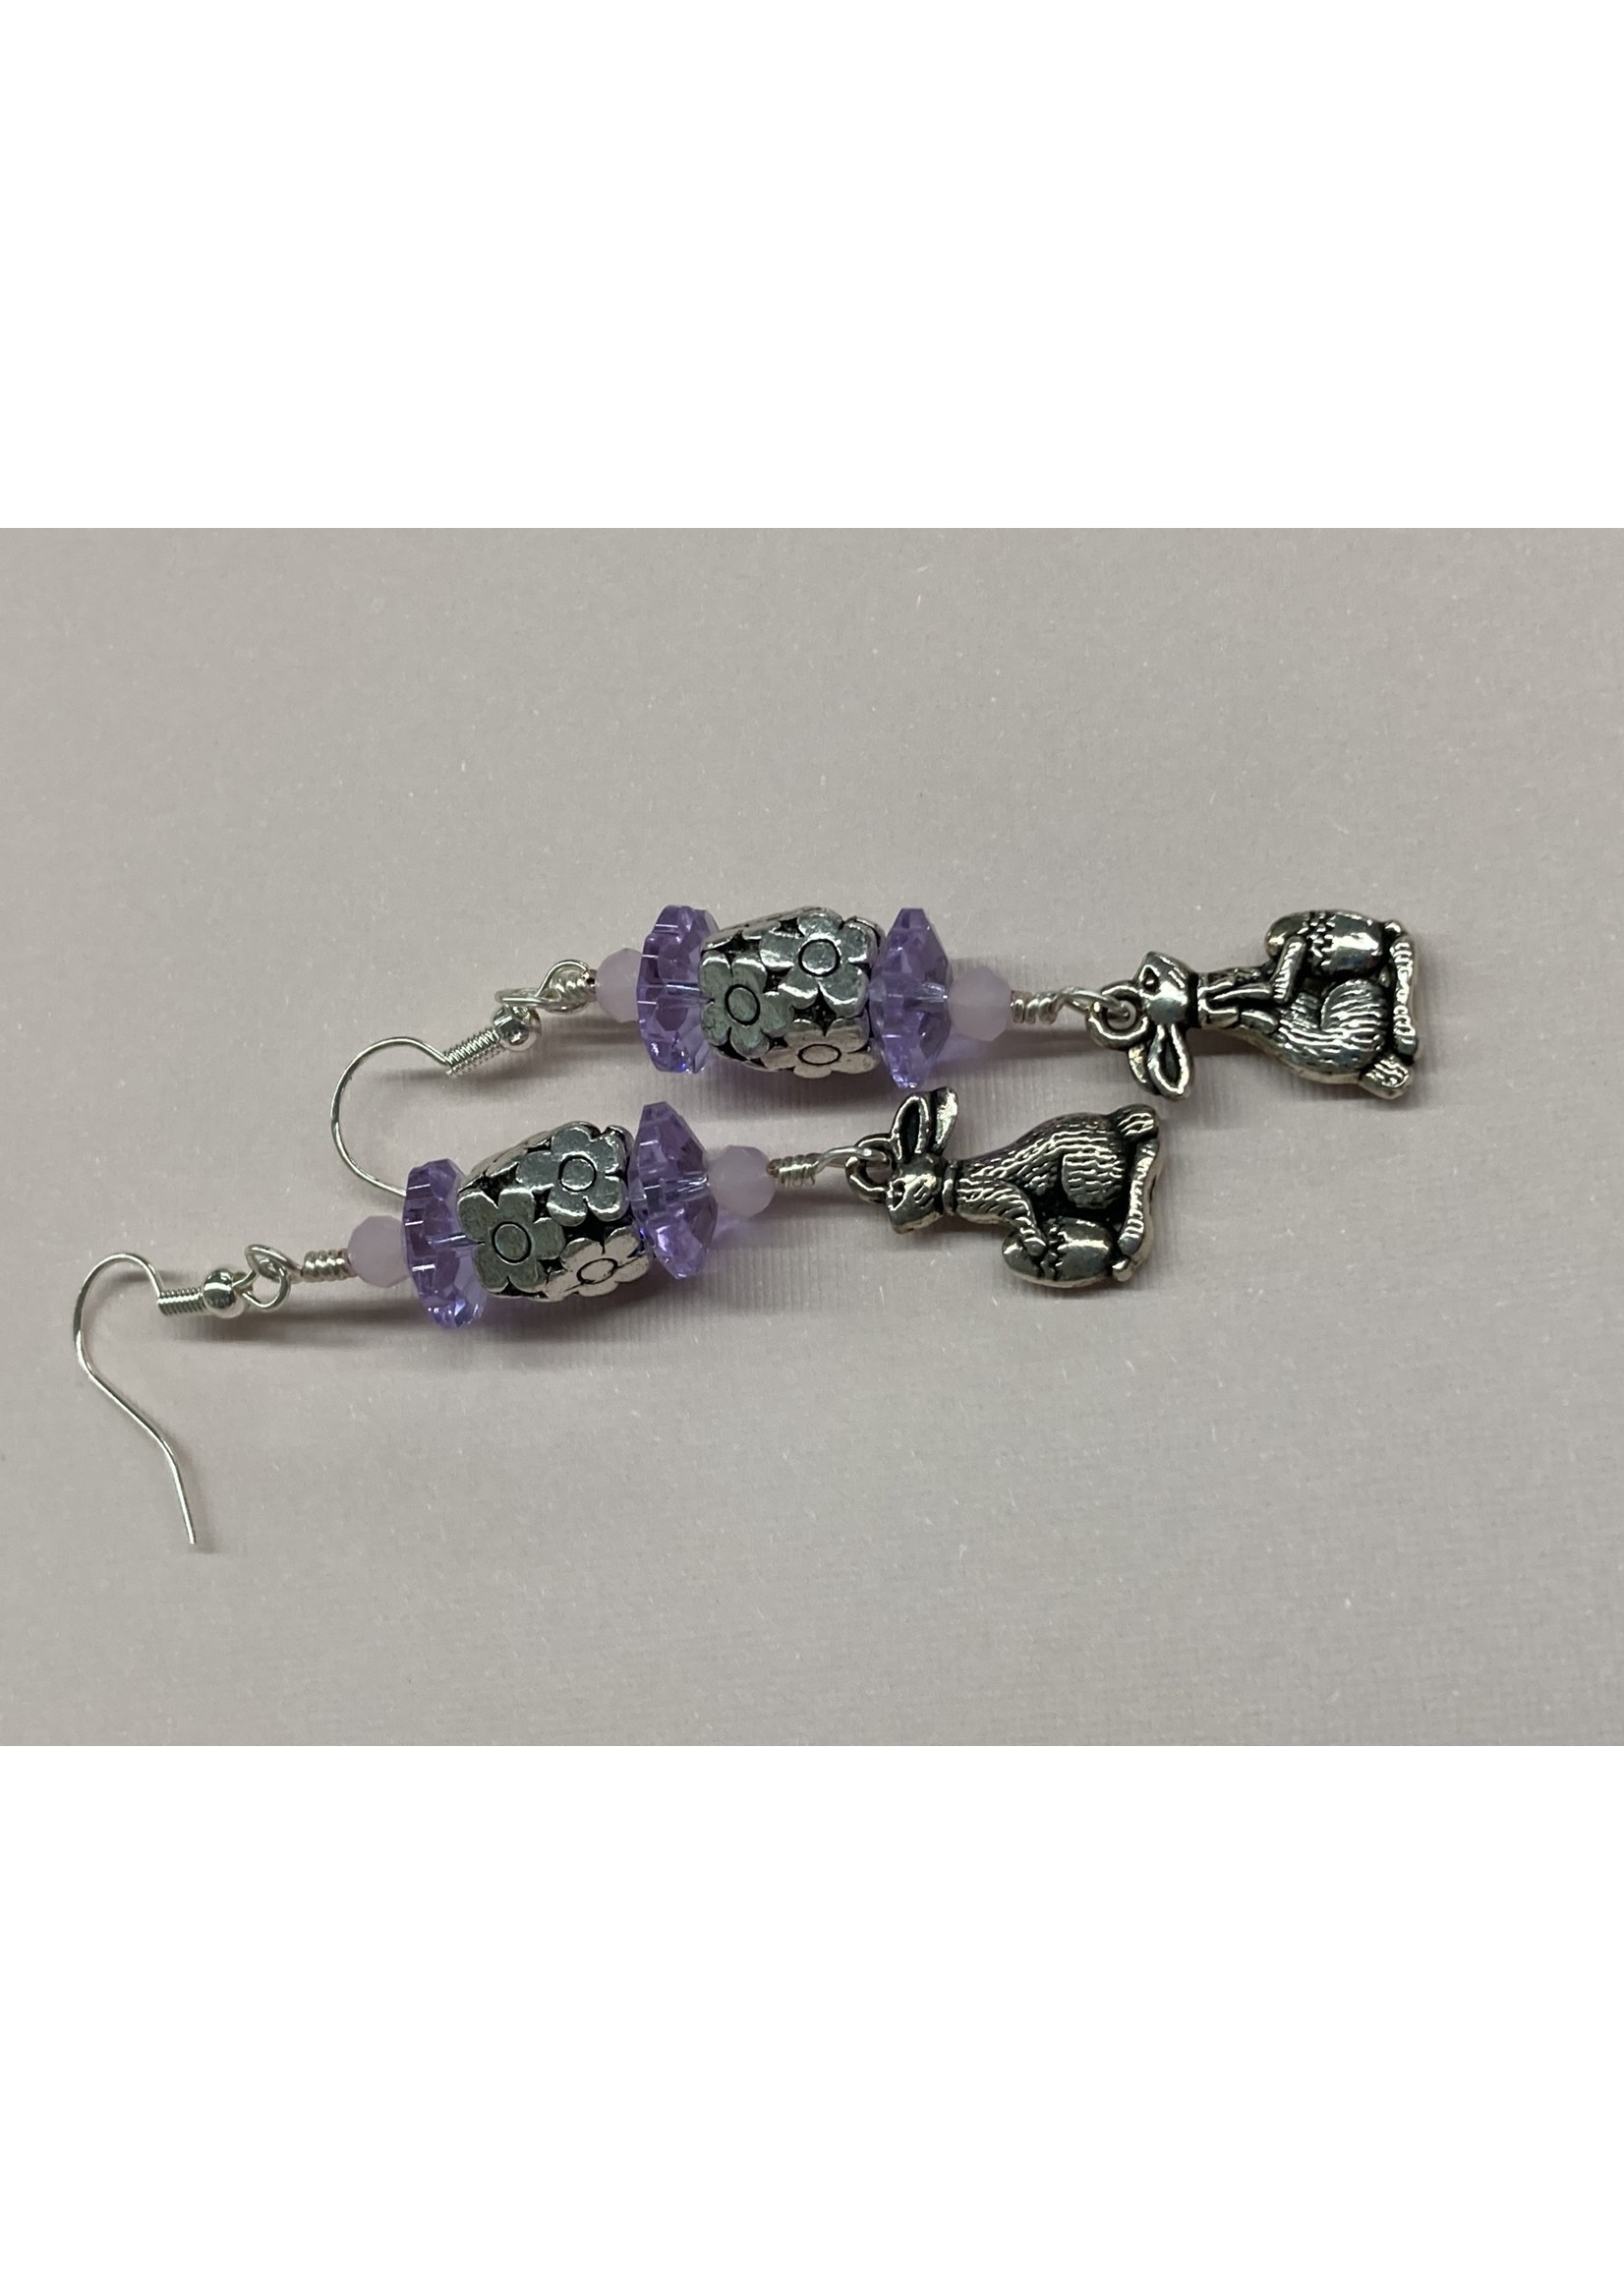 Our Twisted Dahlia E008 Silver Rabbit Charm with Silver Daisy Beads, Daisy Crystals, and Pink Crystal Earrings